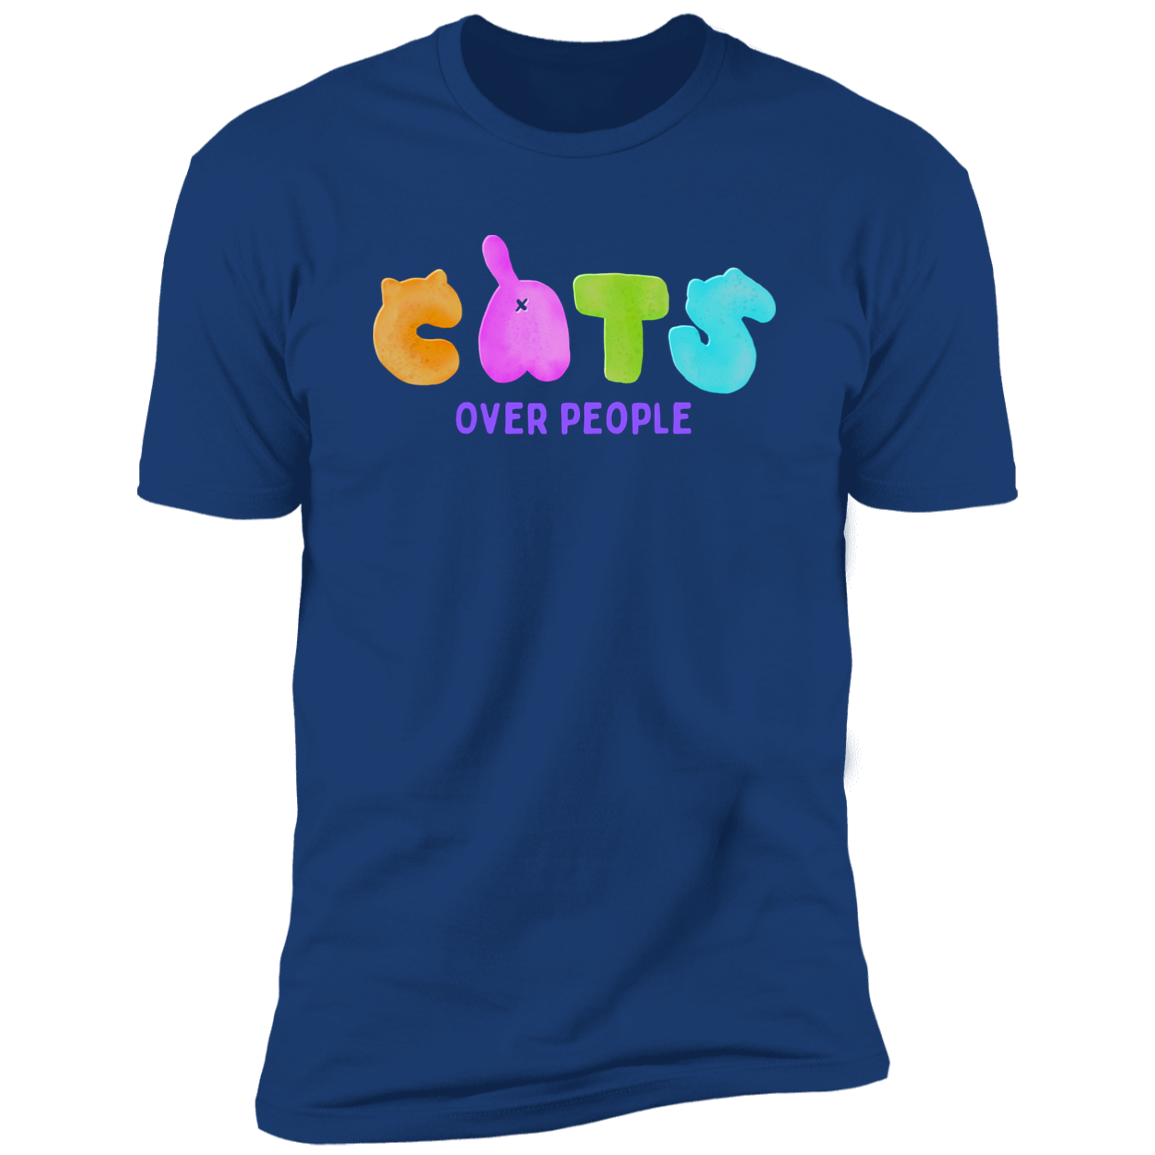 Cats Over People T-shirt, Cat Shirt for humans, in royal blue